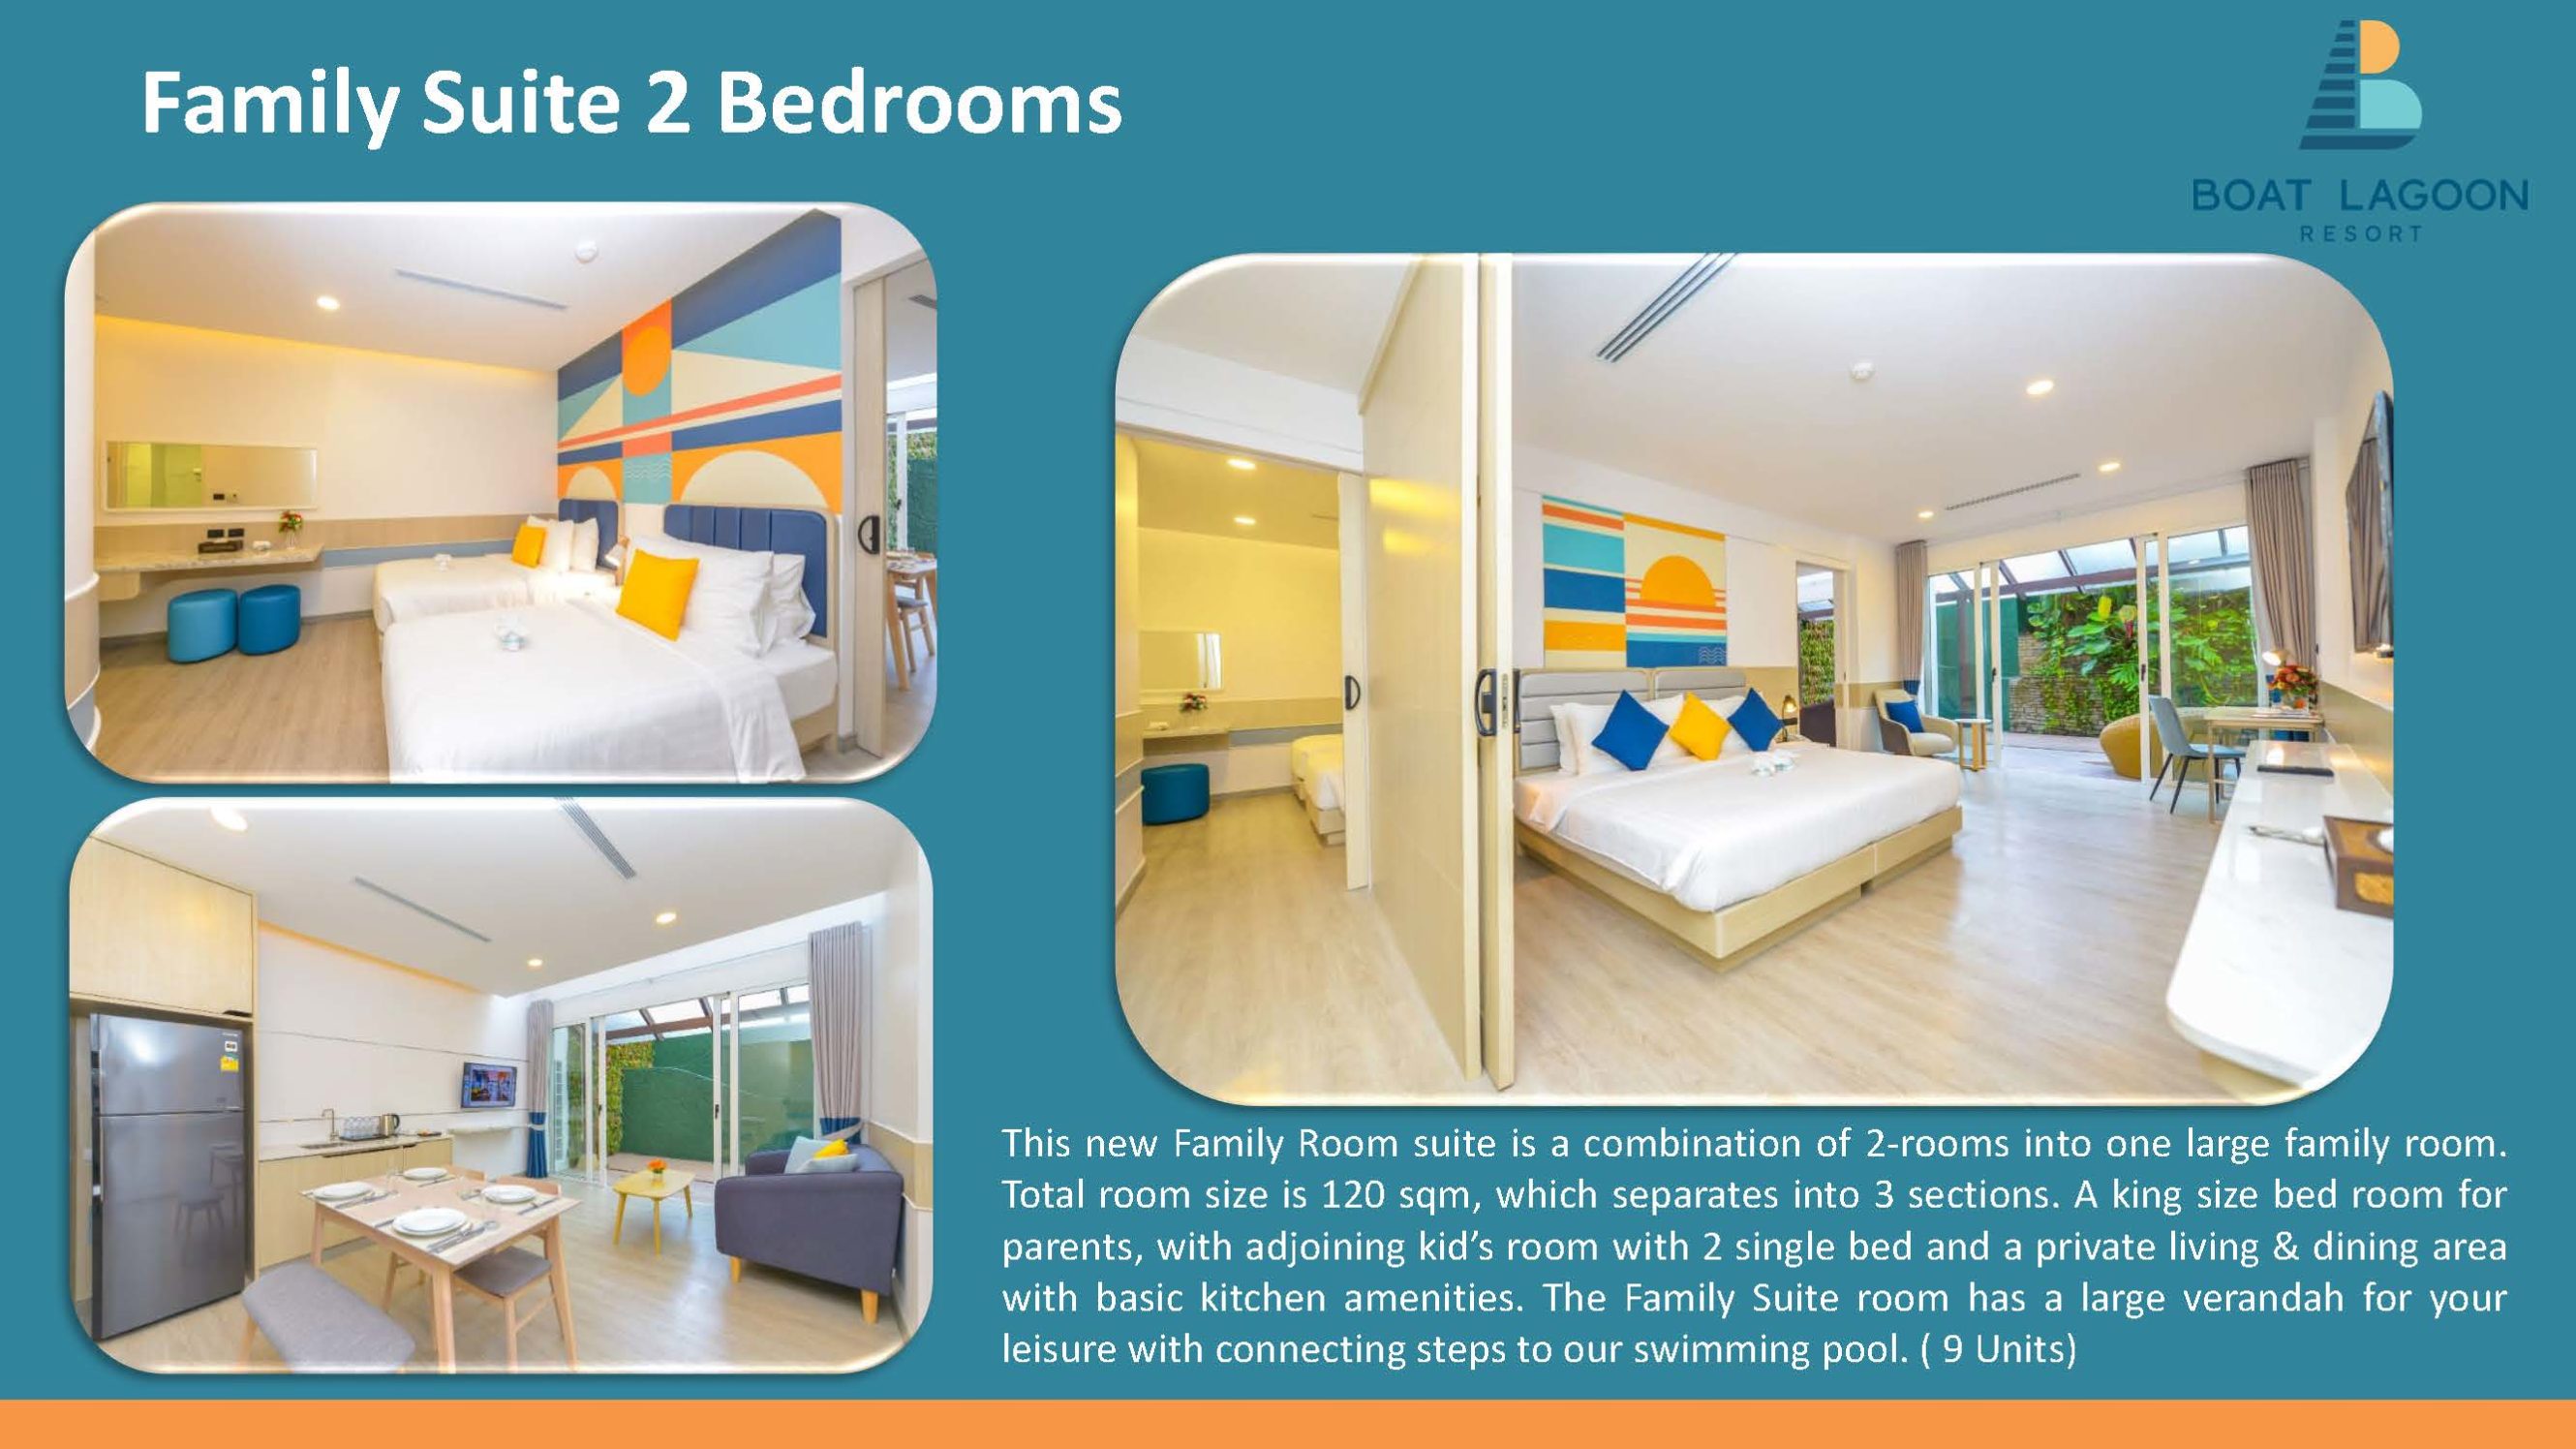 Family Suite 2 Bedrooms